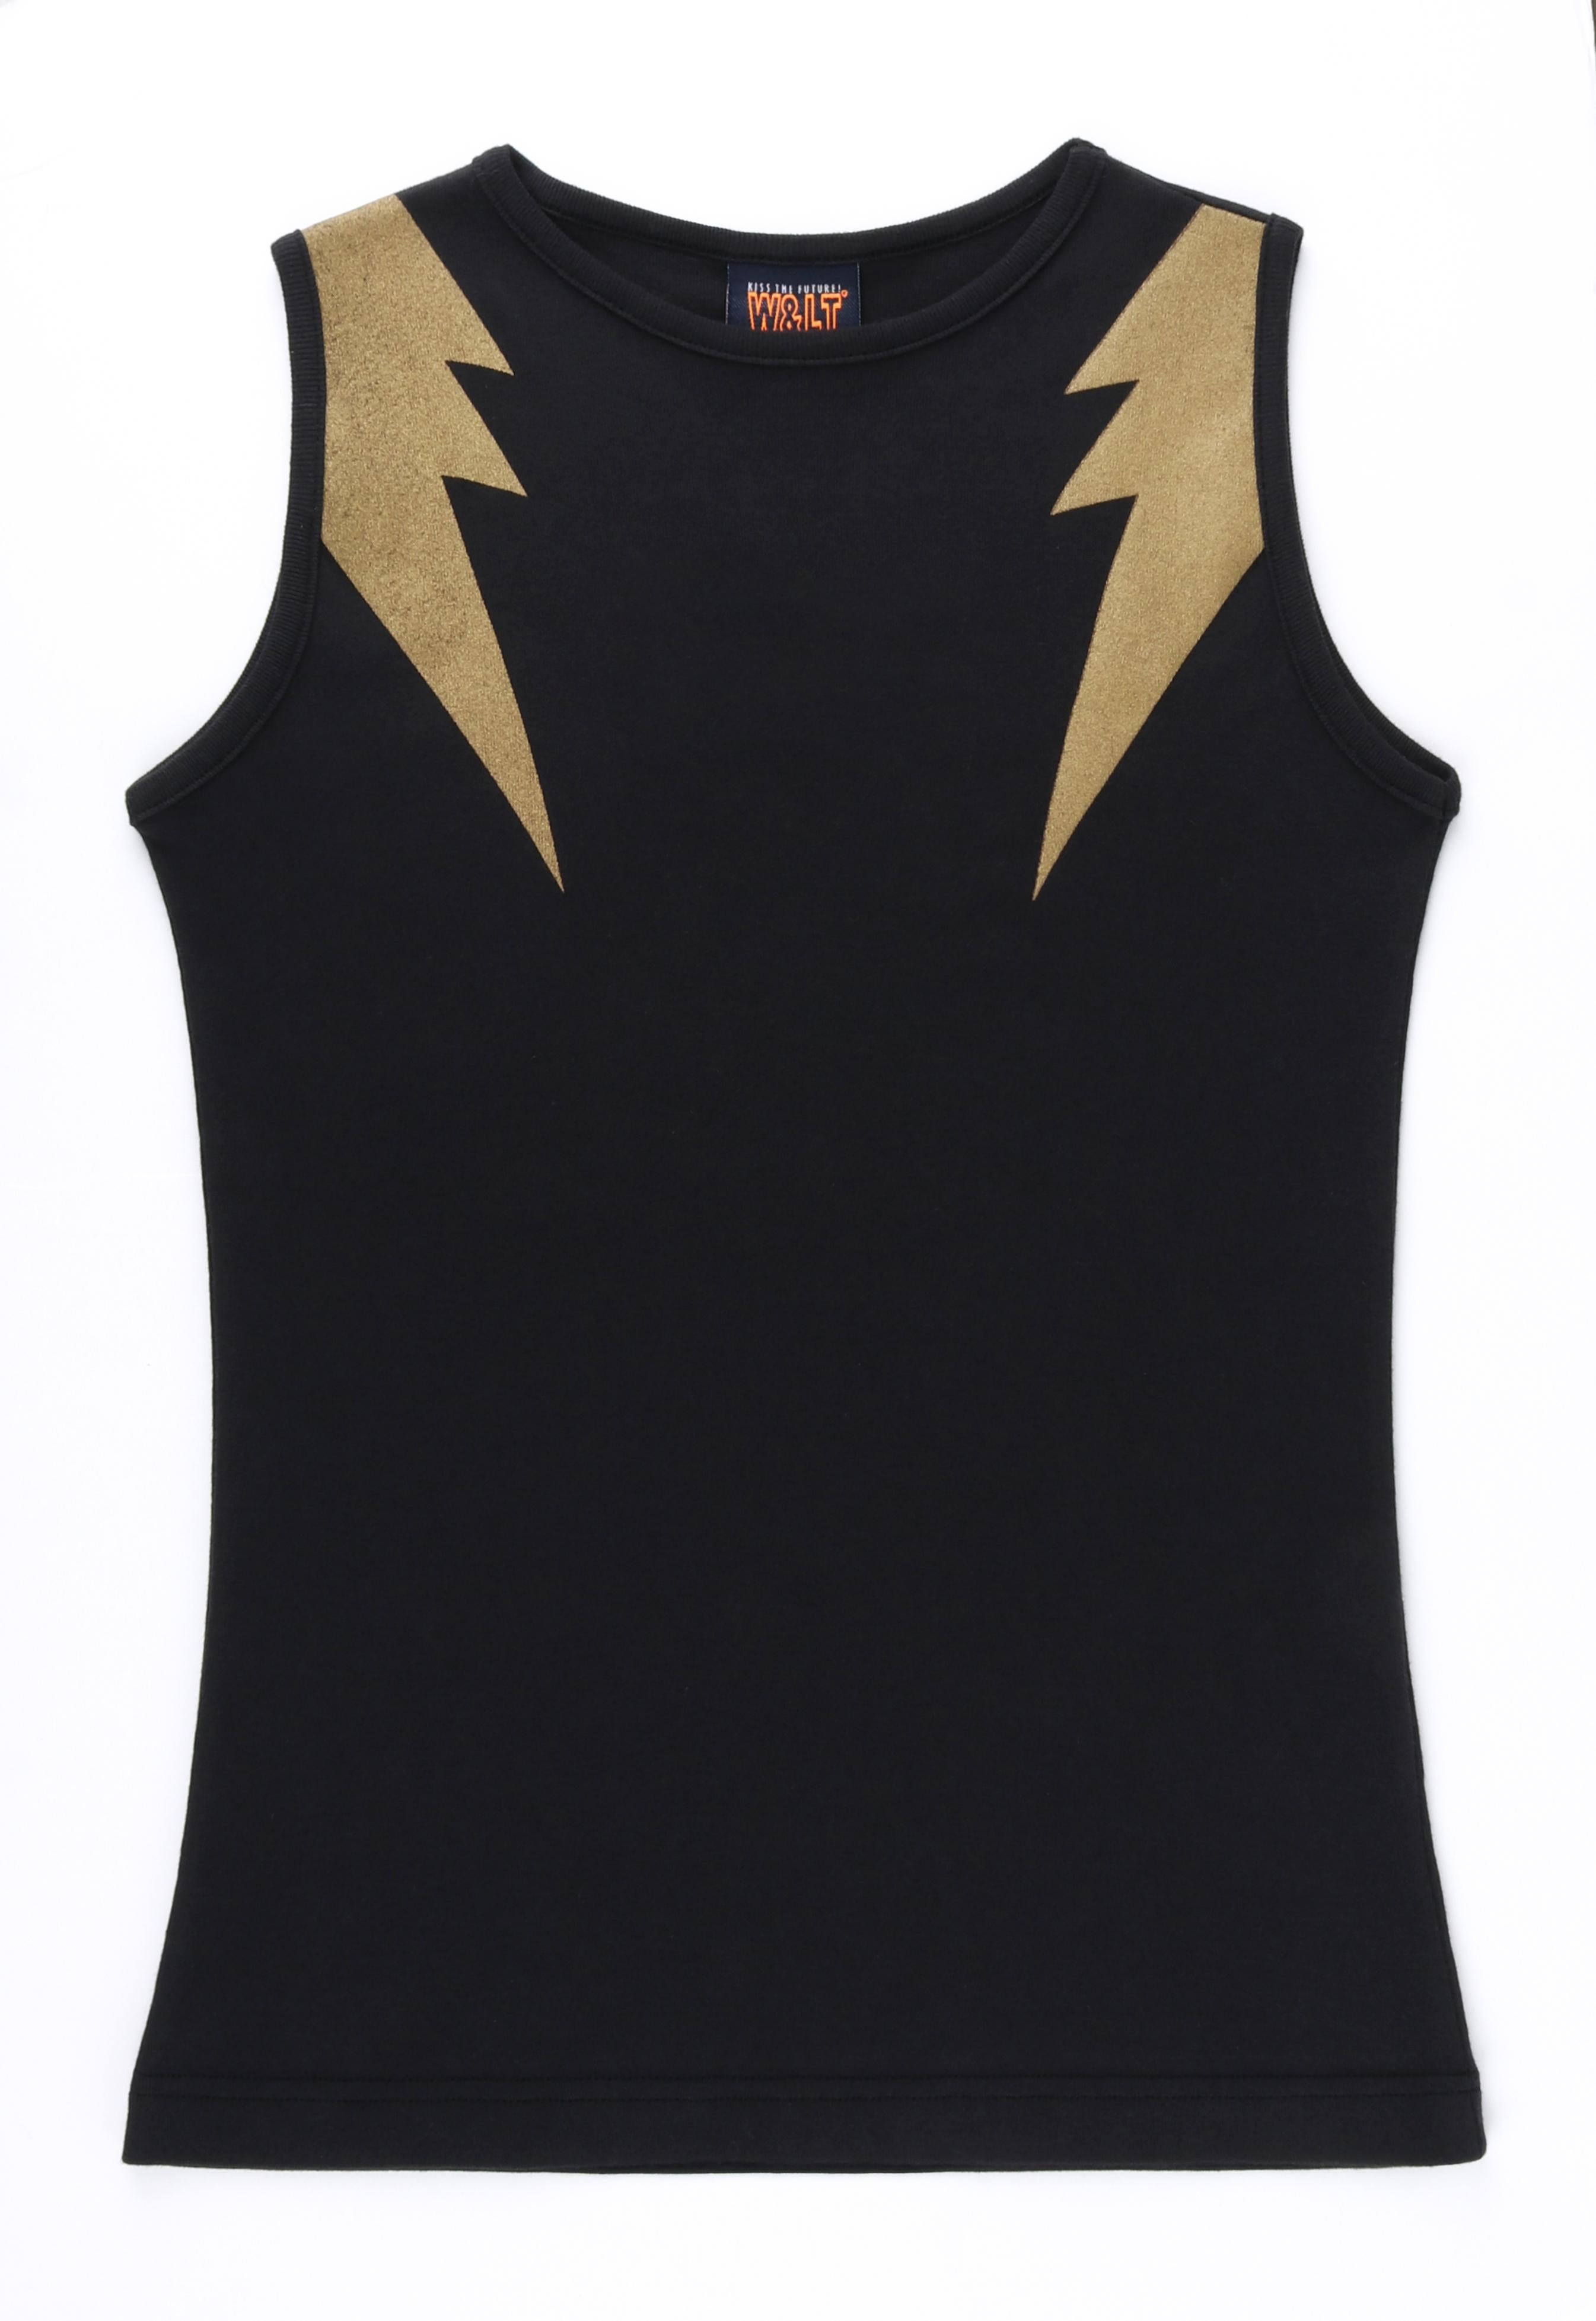 WALTER VAN BEIRENDONCK c.2010's Black Gold Metallic Lightning Bolt Tank Top NWT In New Condition For Sale In Thiensville, WI